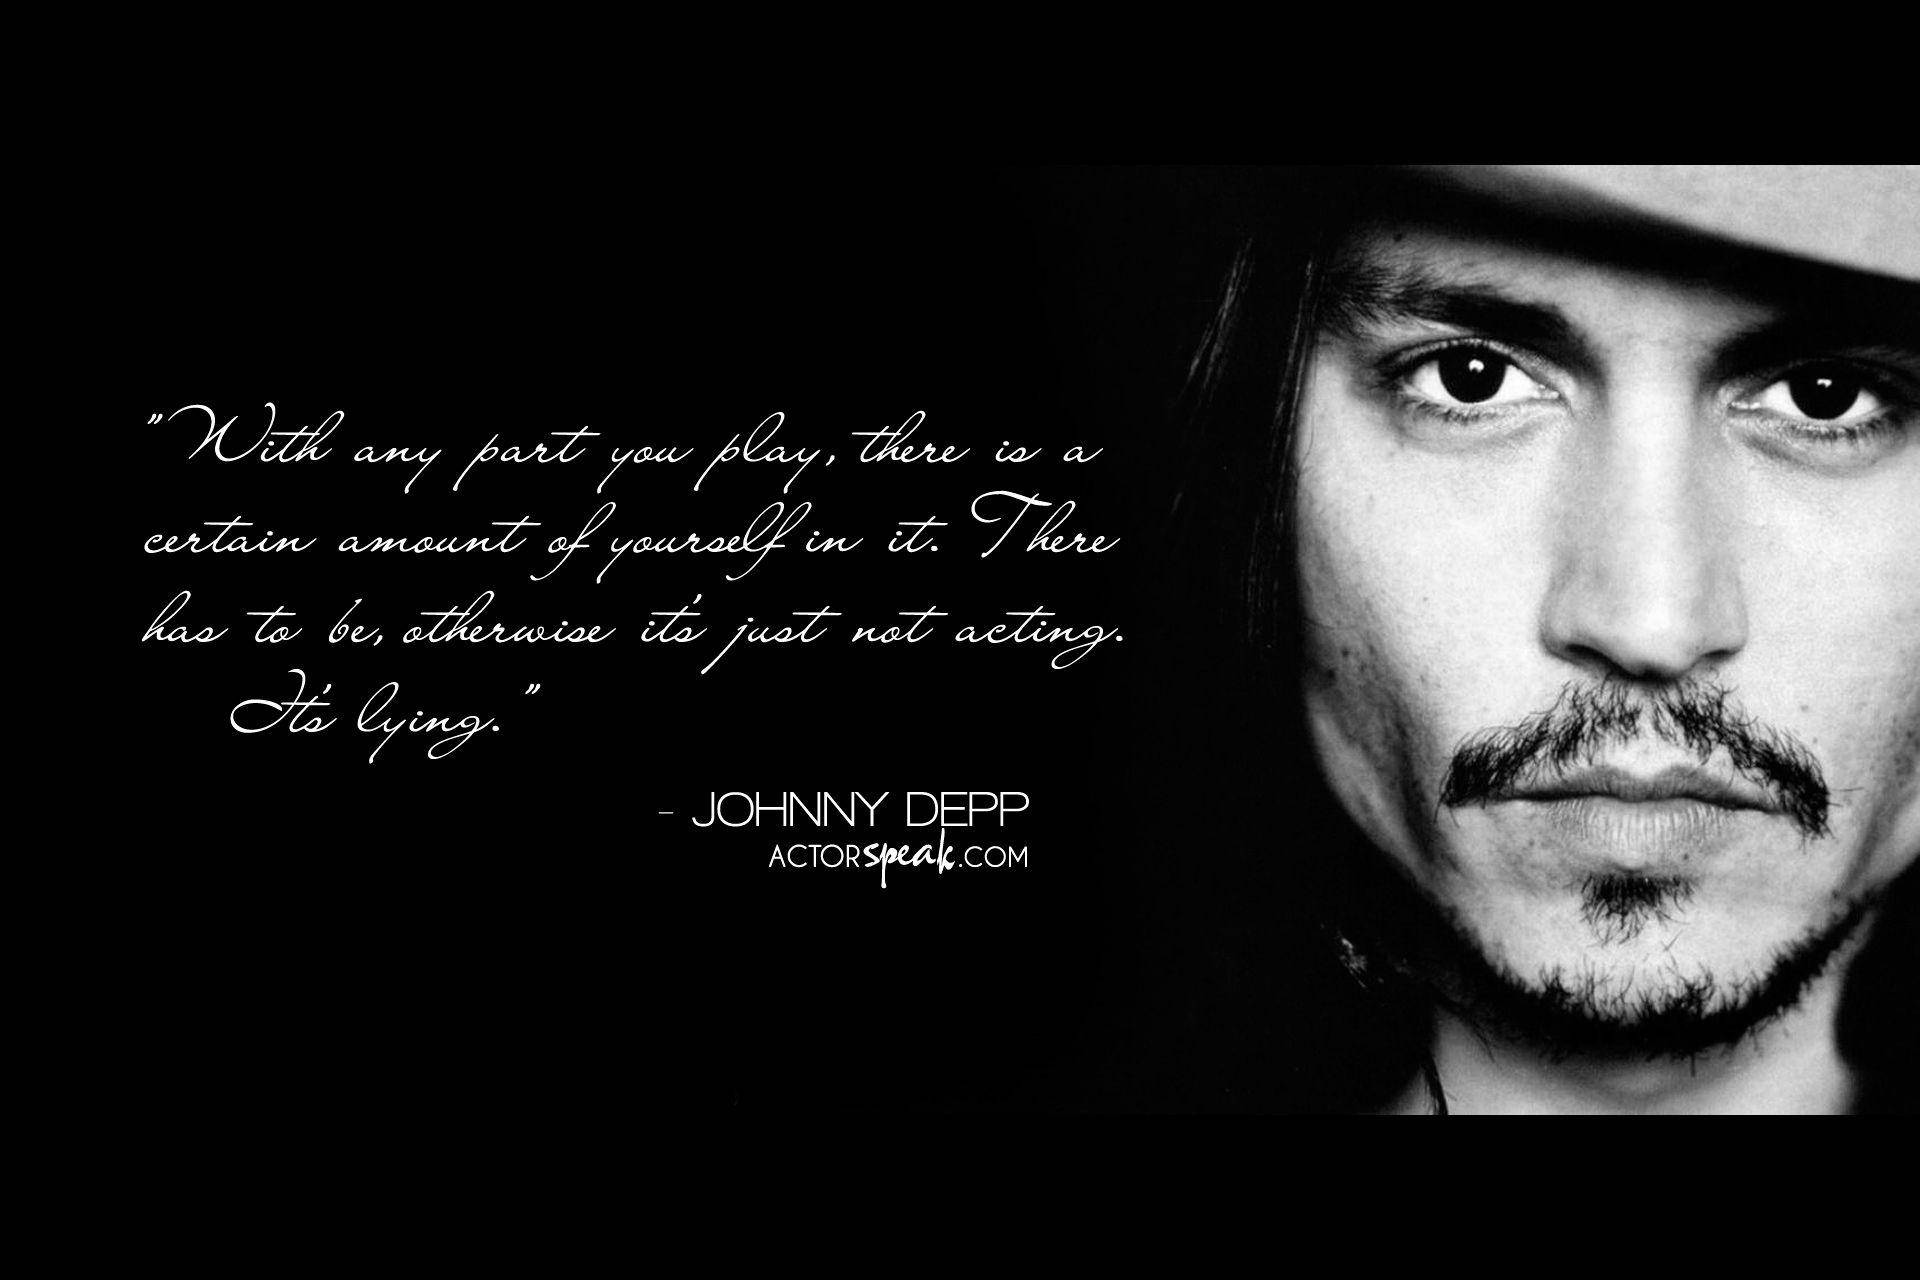 Johnny Depp HD Quote About Lying Wallpaper